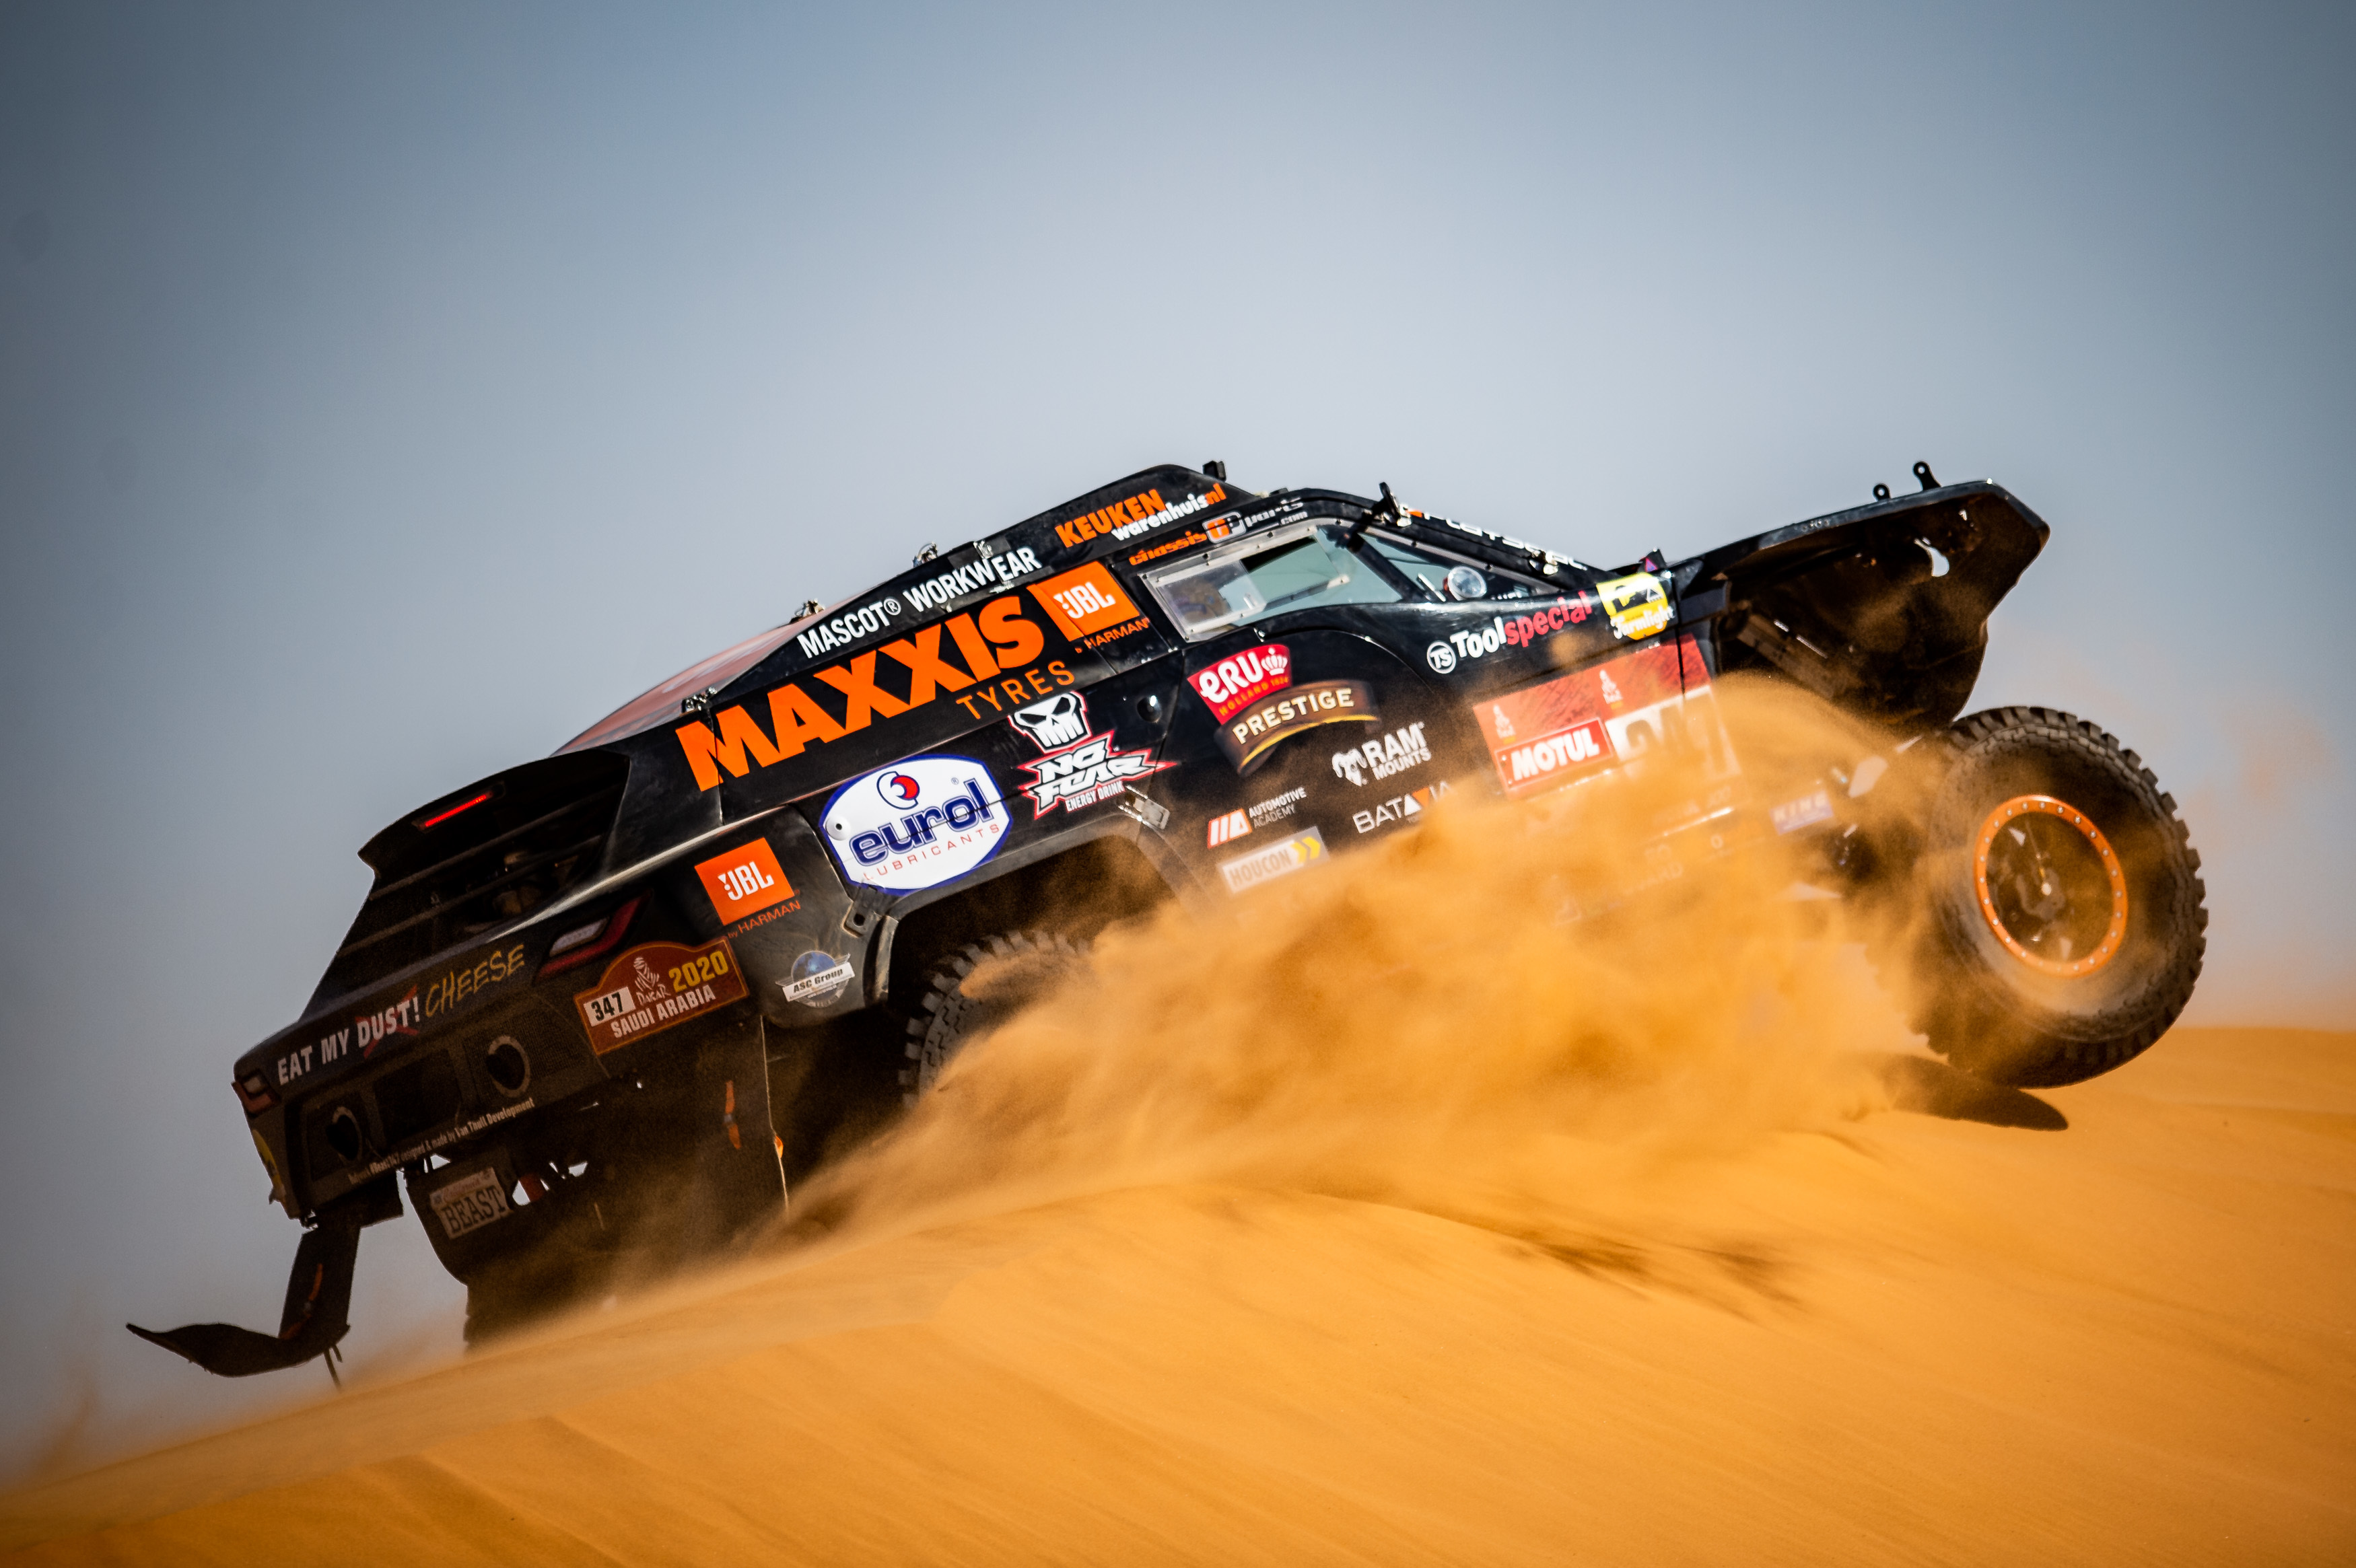 The Coronel’s are back at Maxxis upcoming Dakar rally!